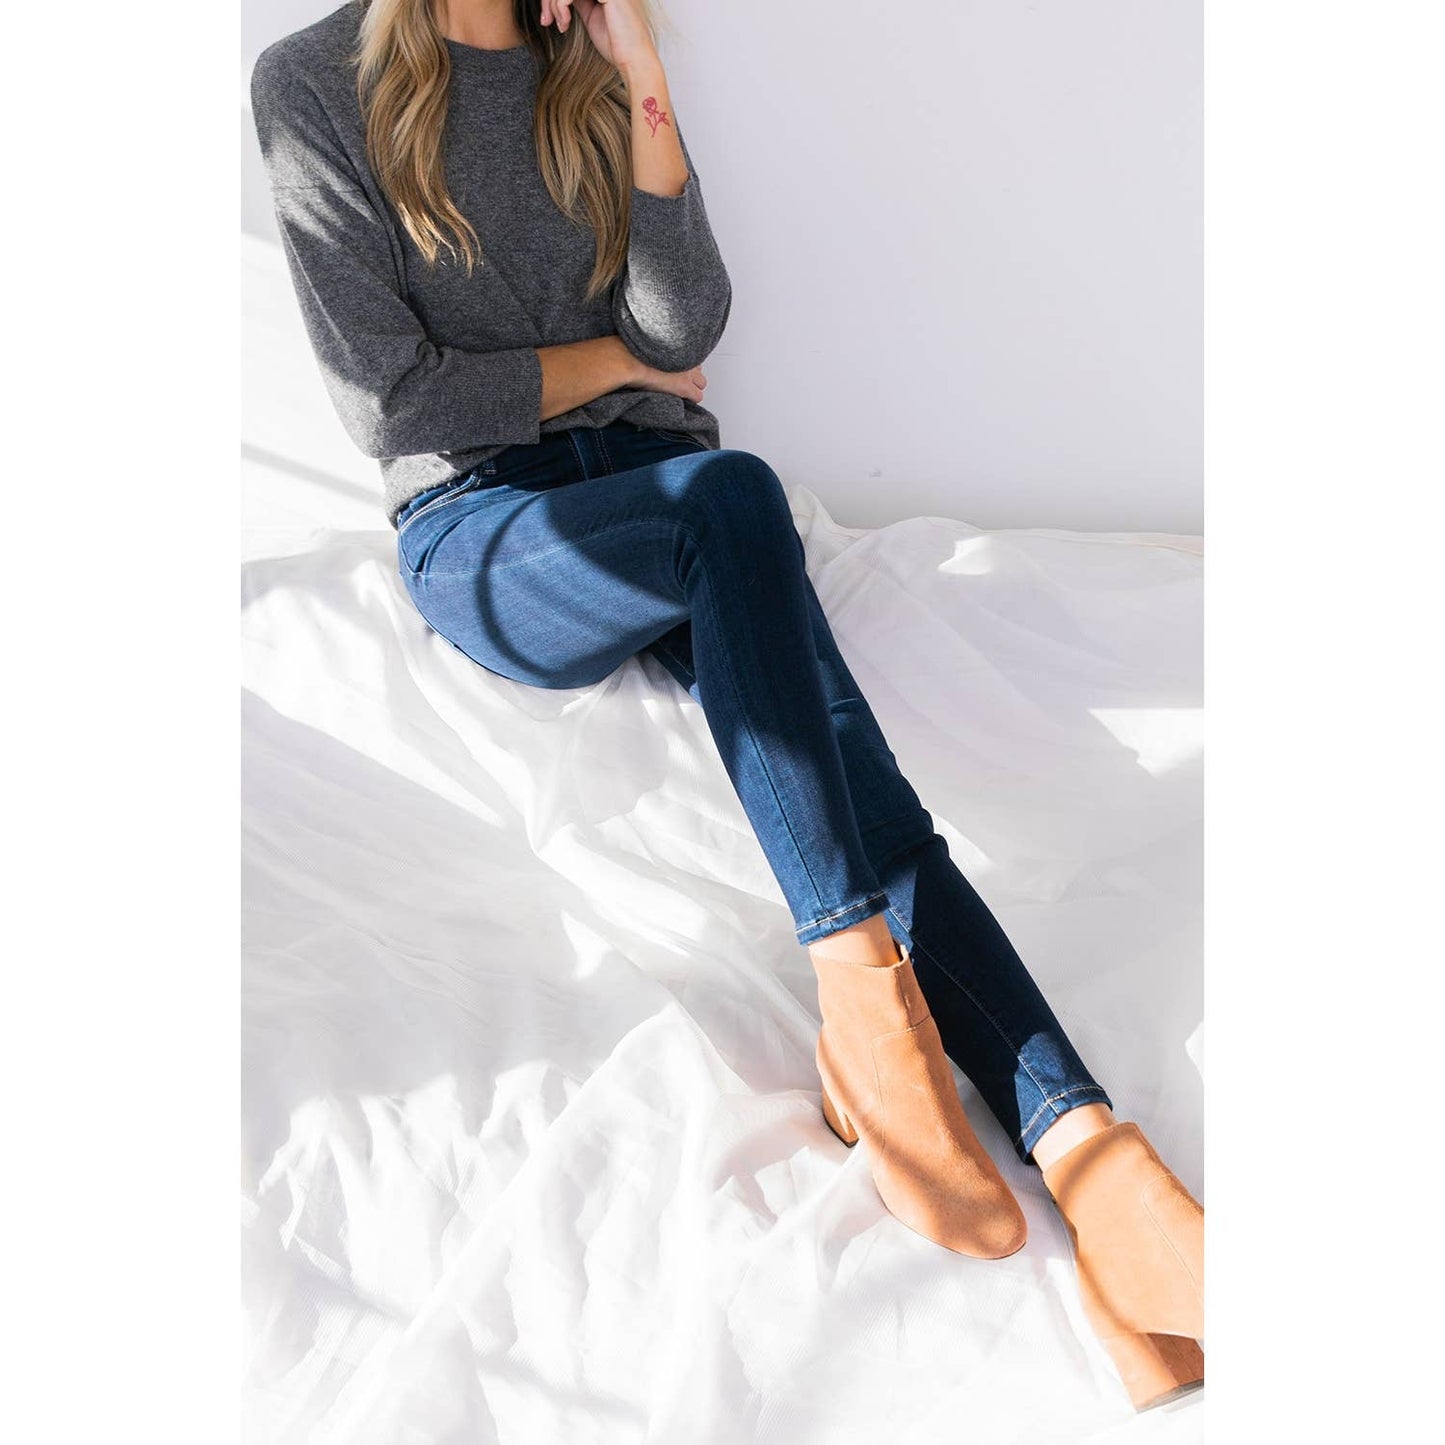 Masie Mid-Rise Ankle Skinny Jeans - Wild Luxe Boutique